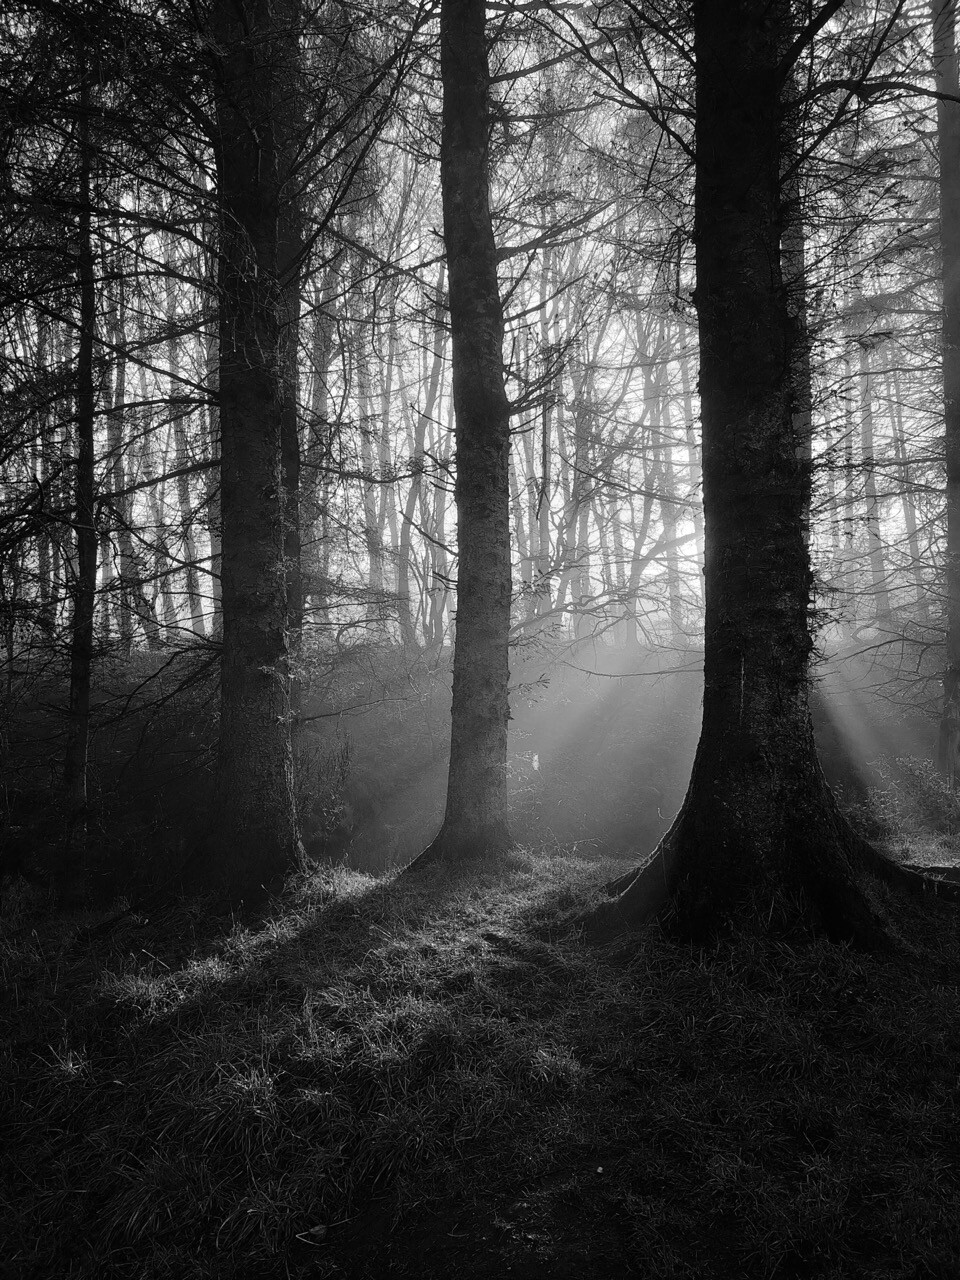 Black and white portrait format image showing shafts of early morning sunlight penetrating the tall, straight trunks of Scots pine trees and casting dark shadows in woodland. The sun is hidden behind one of the tree trunks so all of the beams of light seem to emanate from behind it.